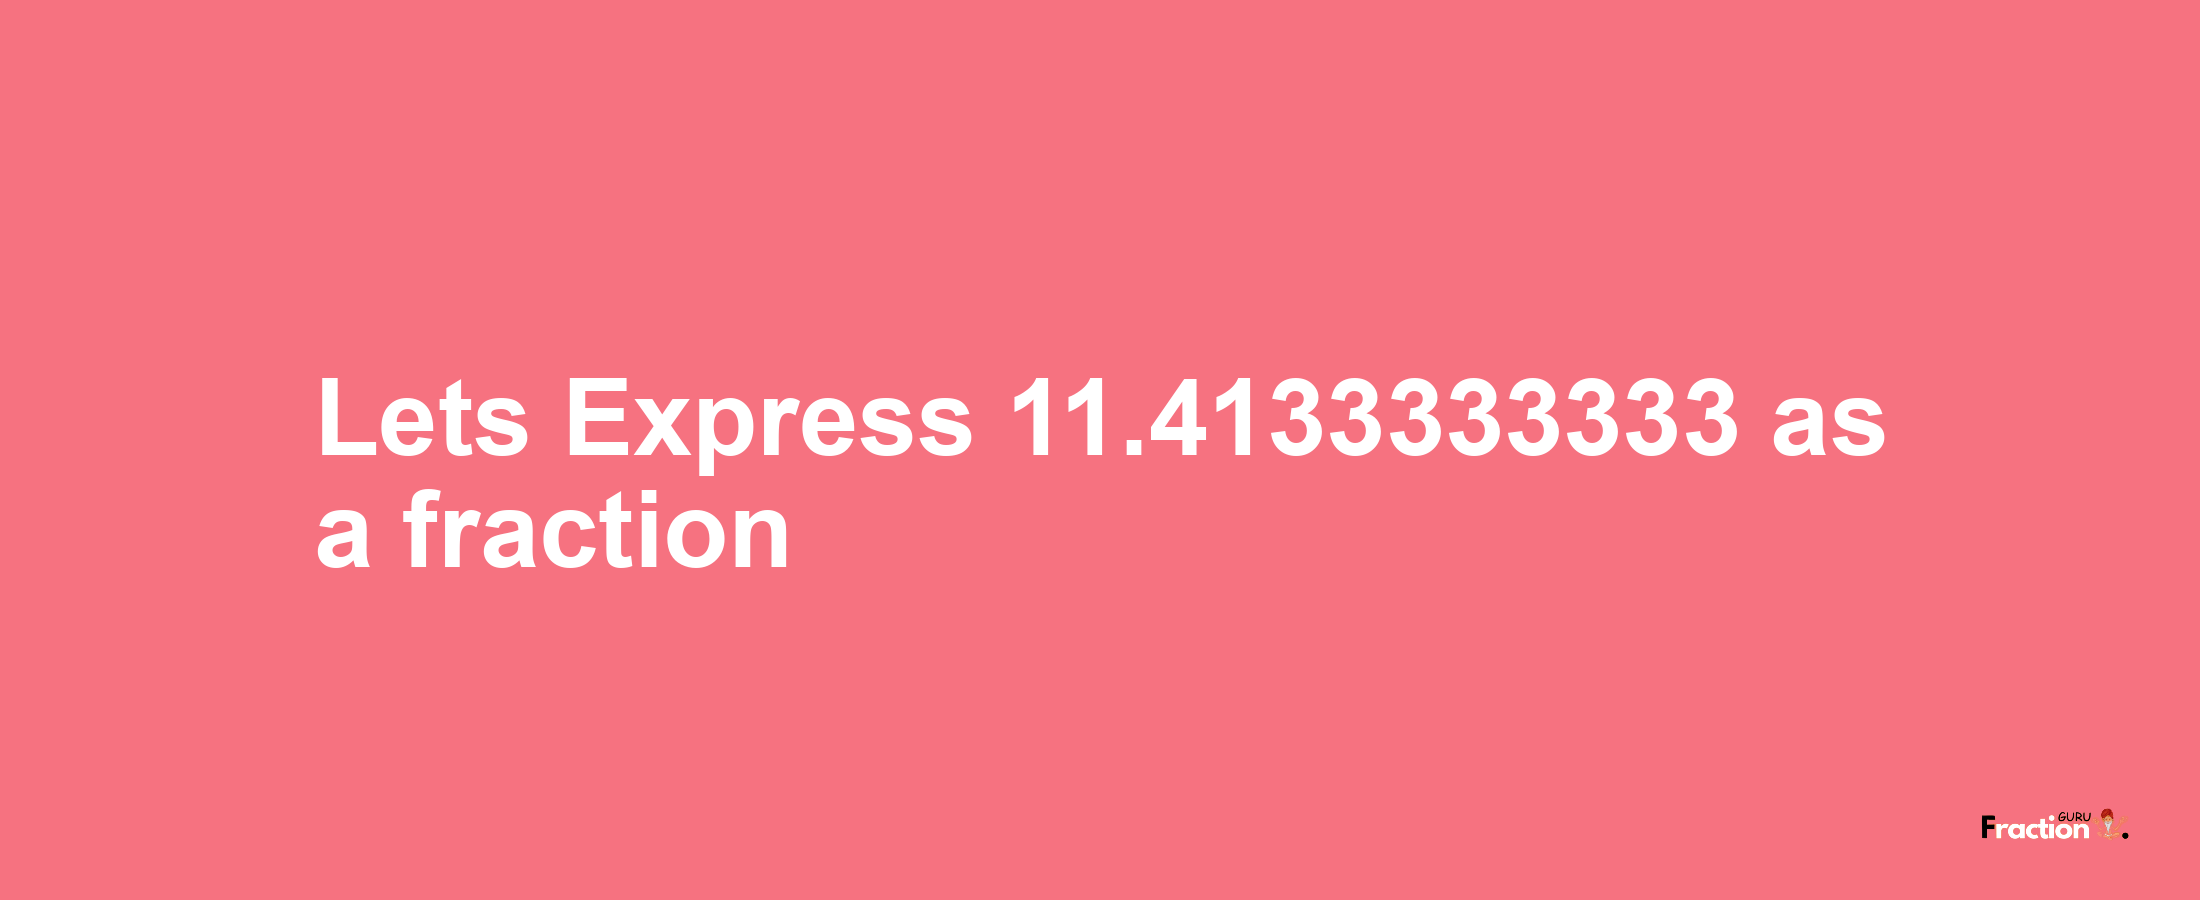 Lets Express 11.4133333333 as afraction